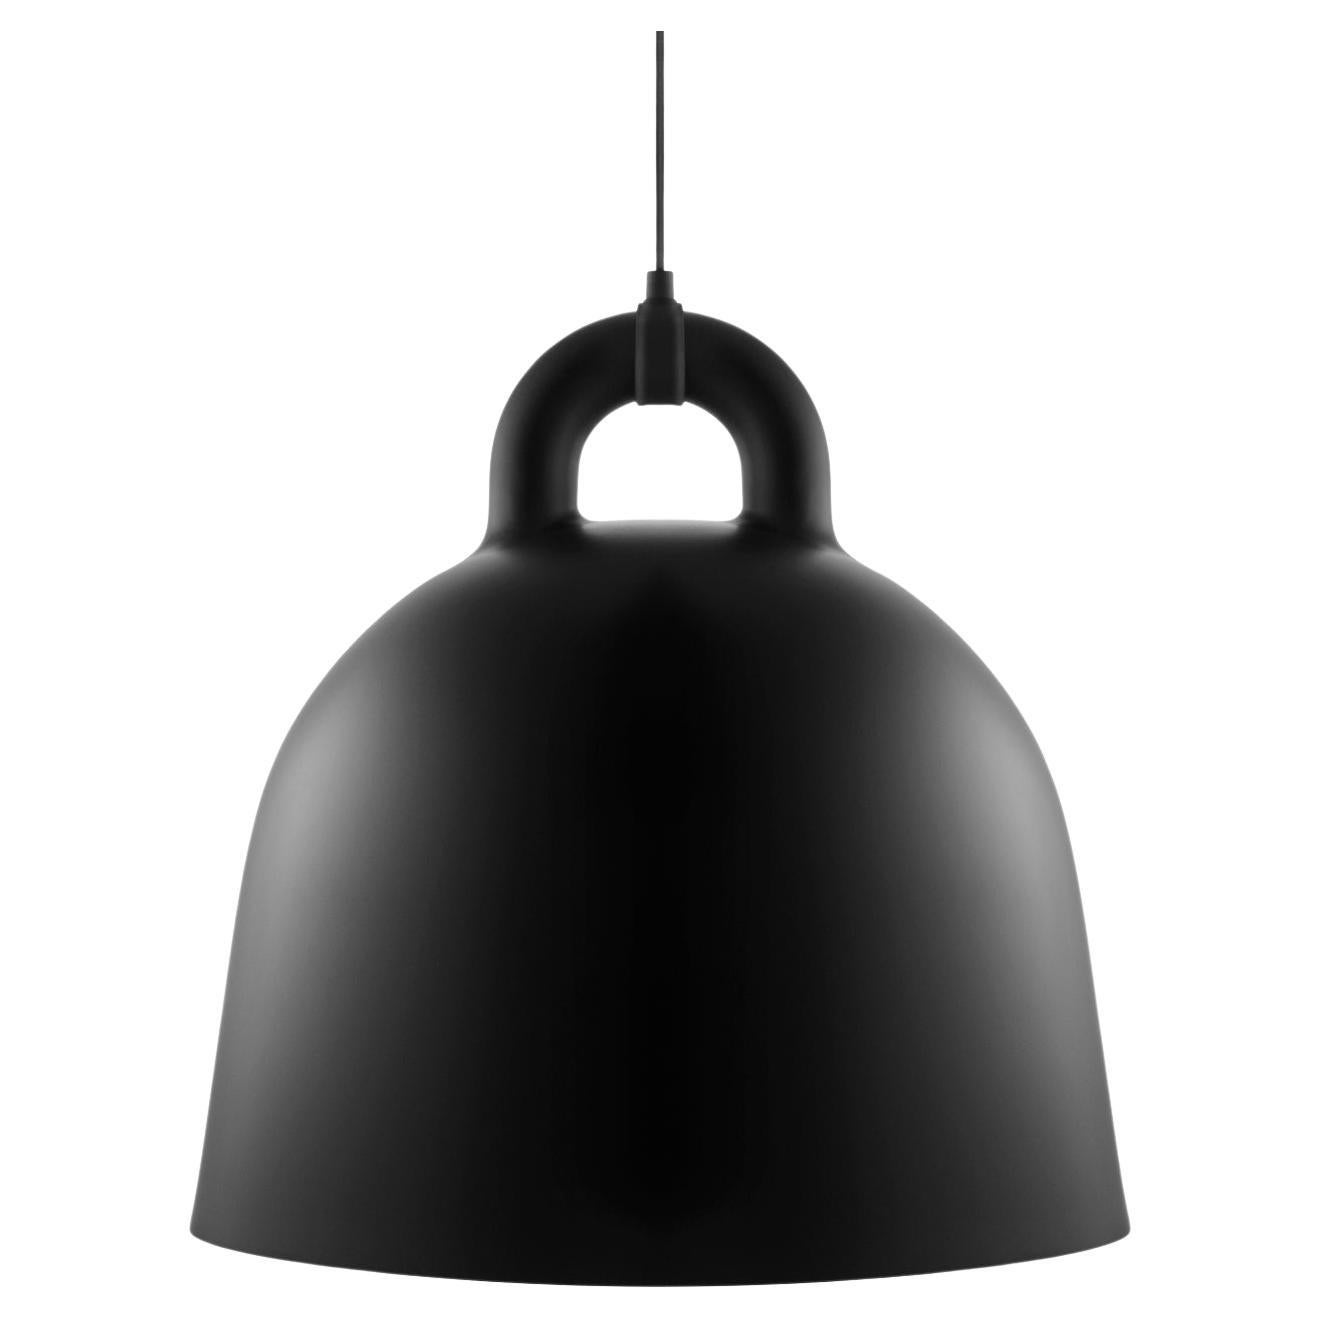 Aluminum Normann Copenhagen Bell Pendant Lamp Small by Andreas Lund & Jacob Rudbeck For Sale